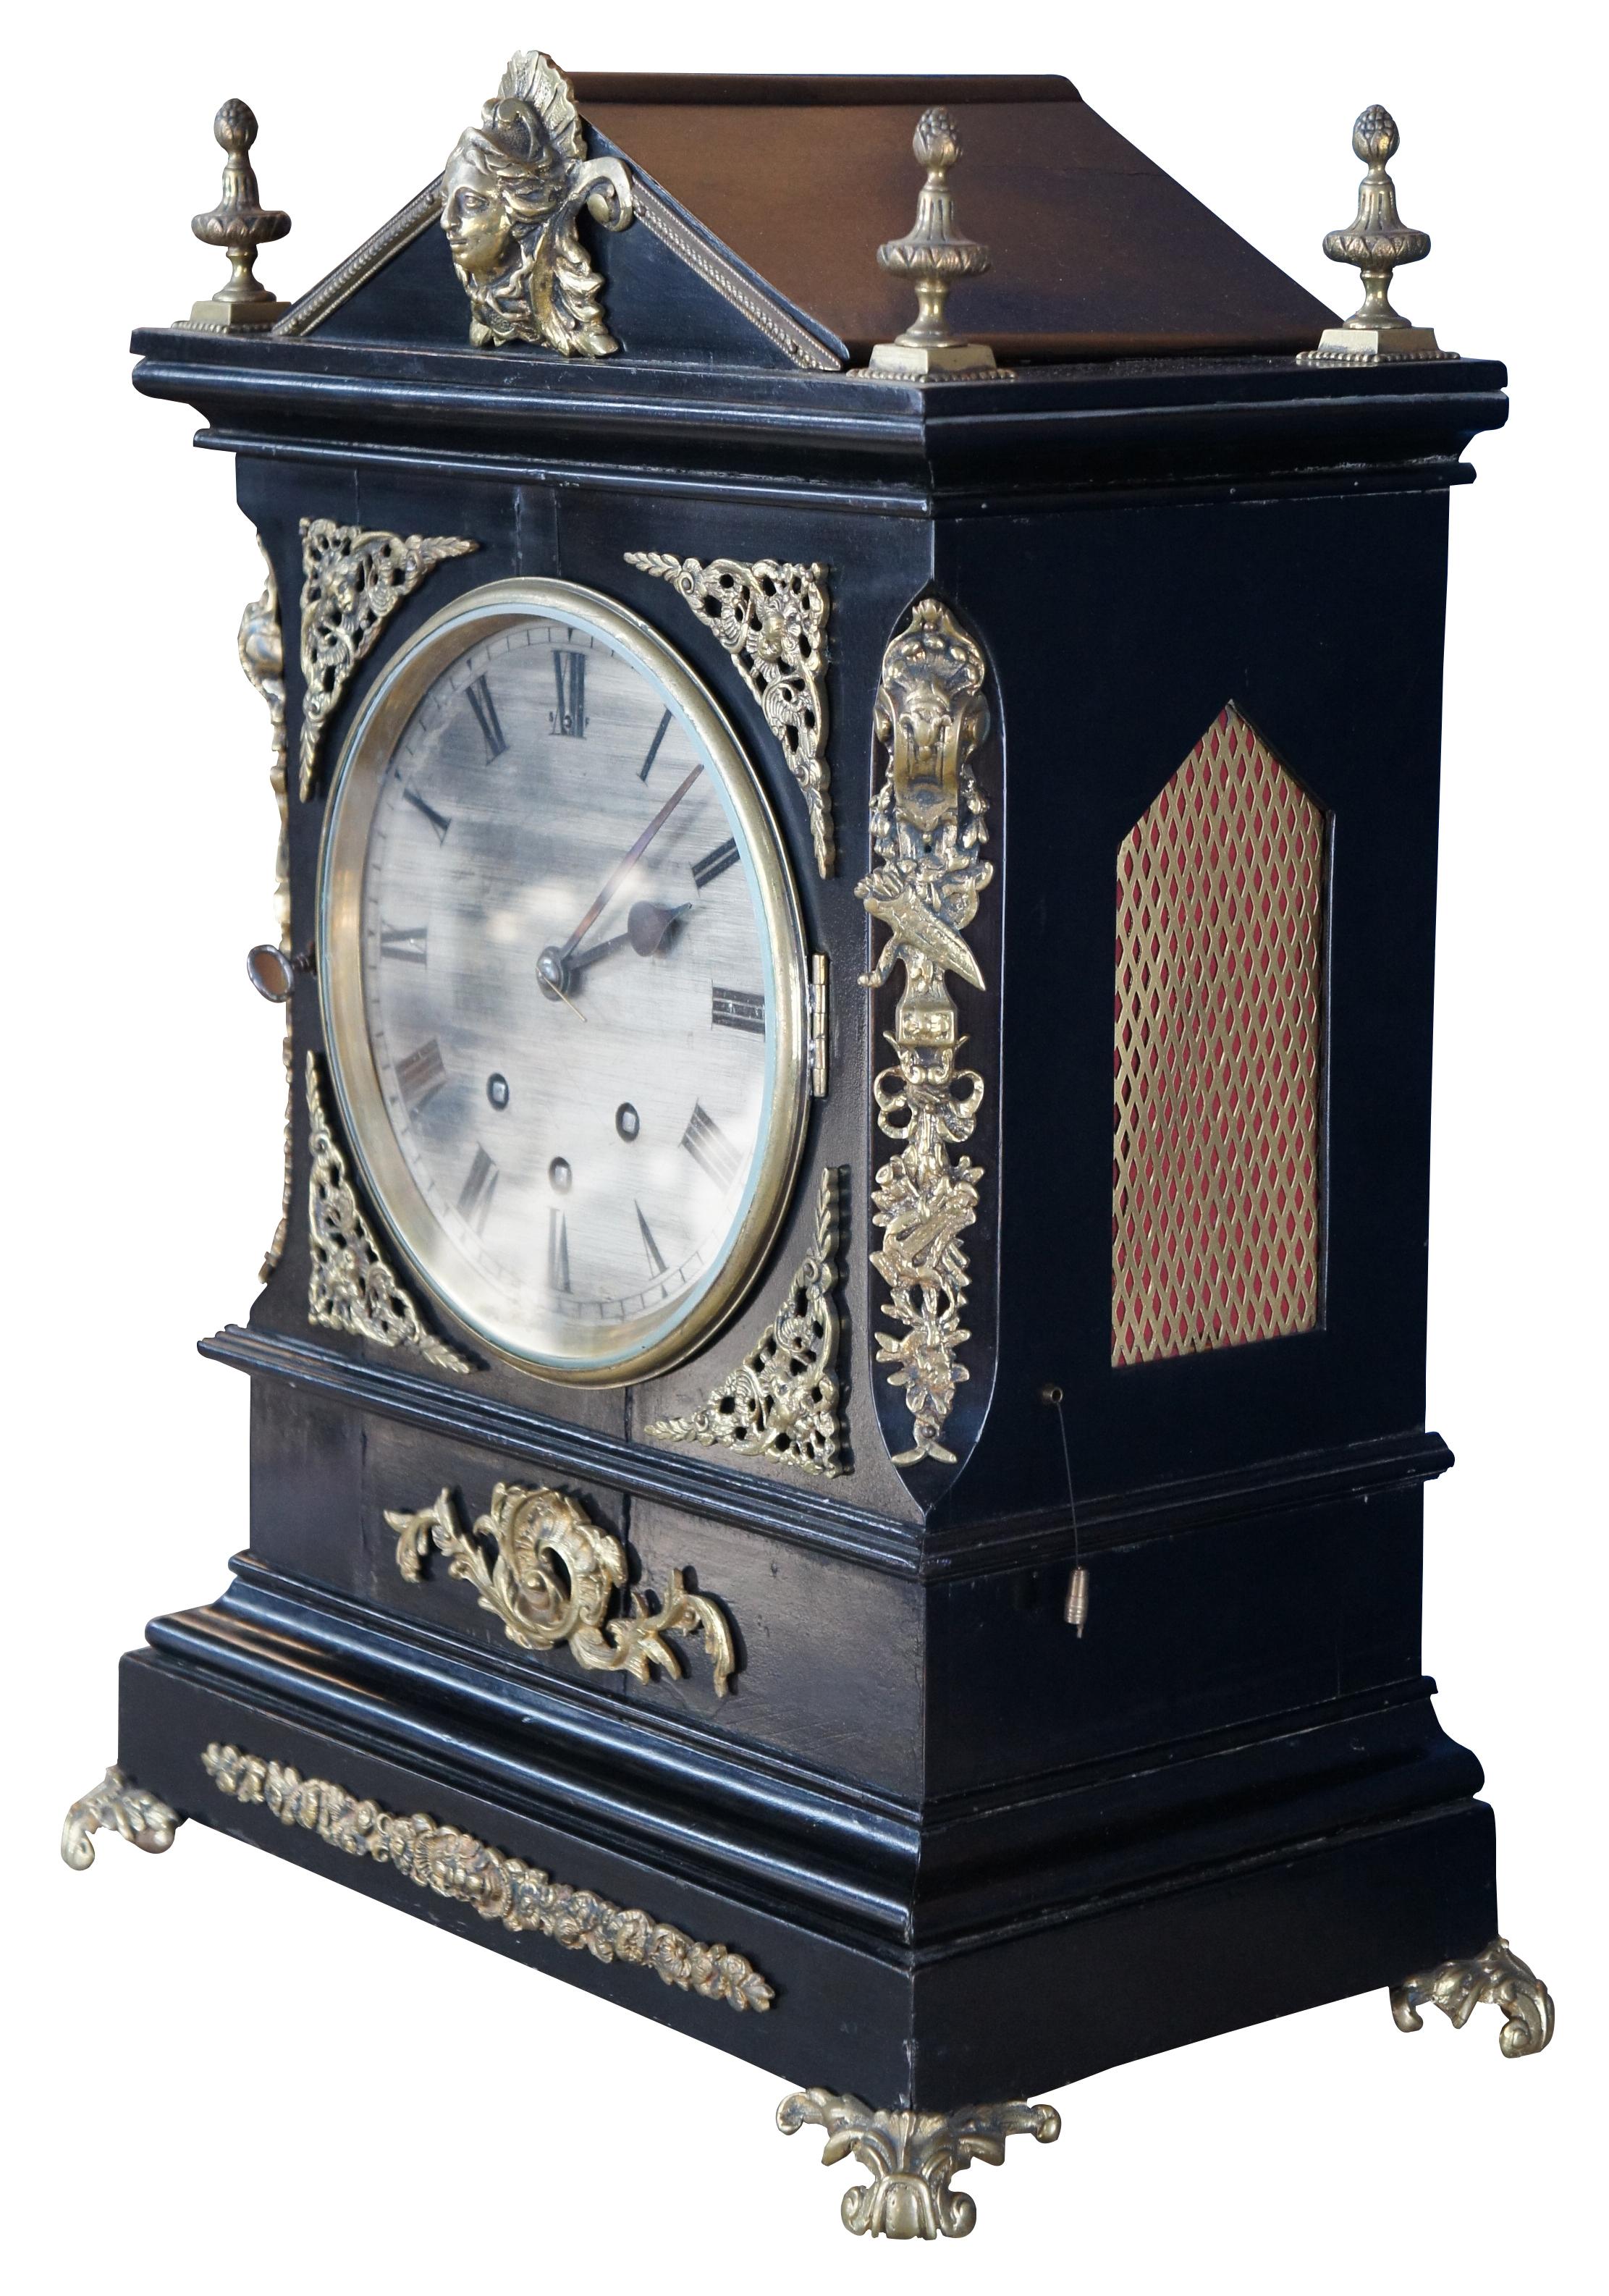 Antique English Georgian bracket clock featuring ebonized case with ormolu accents. The ornate case features gothic styling with an arched top, mesh gilt side panels, jardiniere urn shaped finials and figural mount. Chimes beautifully with several